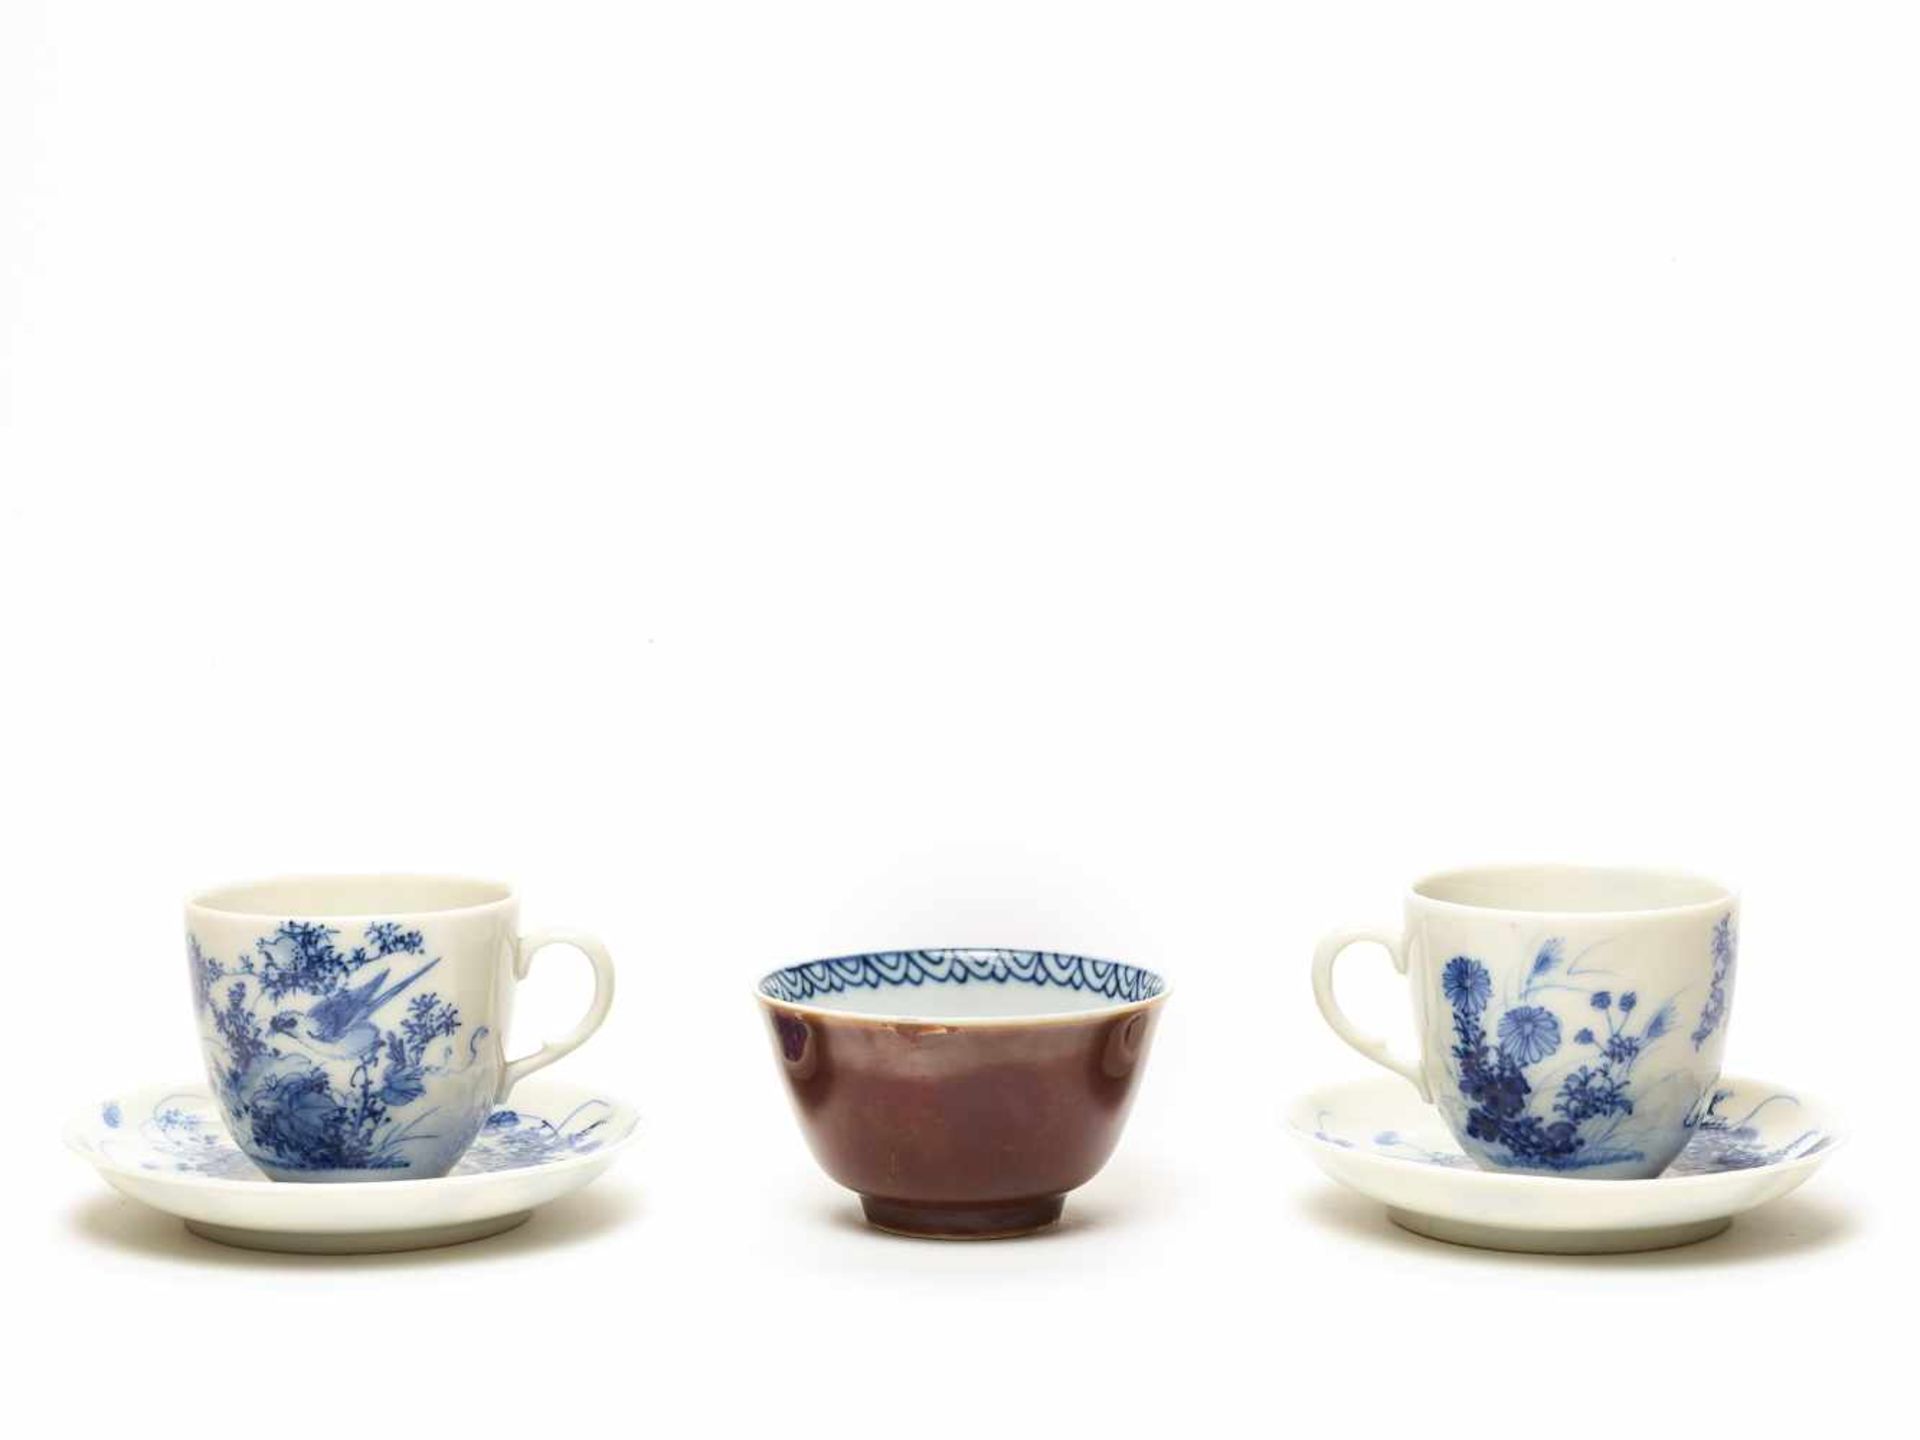 A NICE LOT OF TWO HIRADO CUPS AND SAUCERS AND A RARE MEISSEN CUP, 19TH CENTURYHirado and Meissen